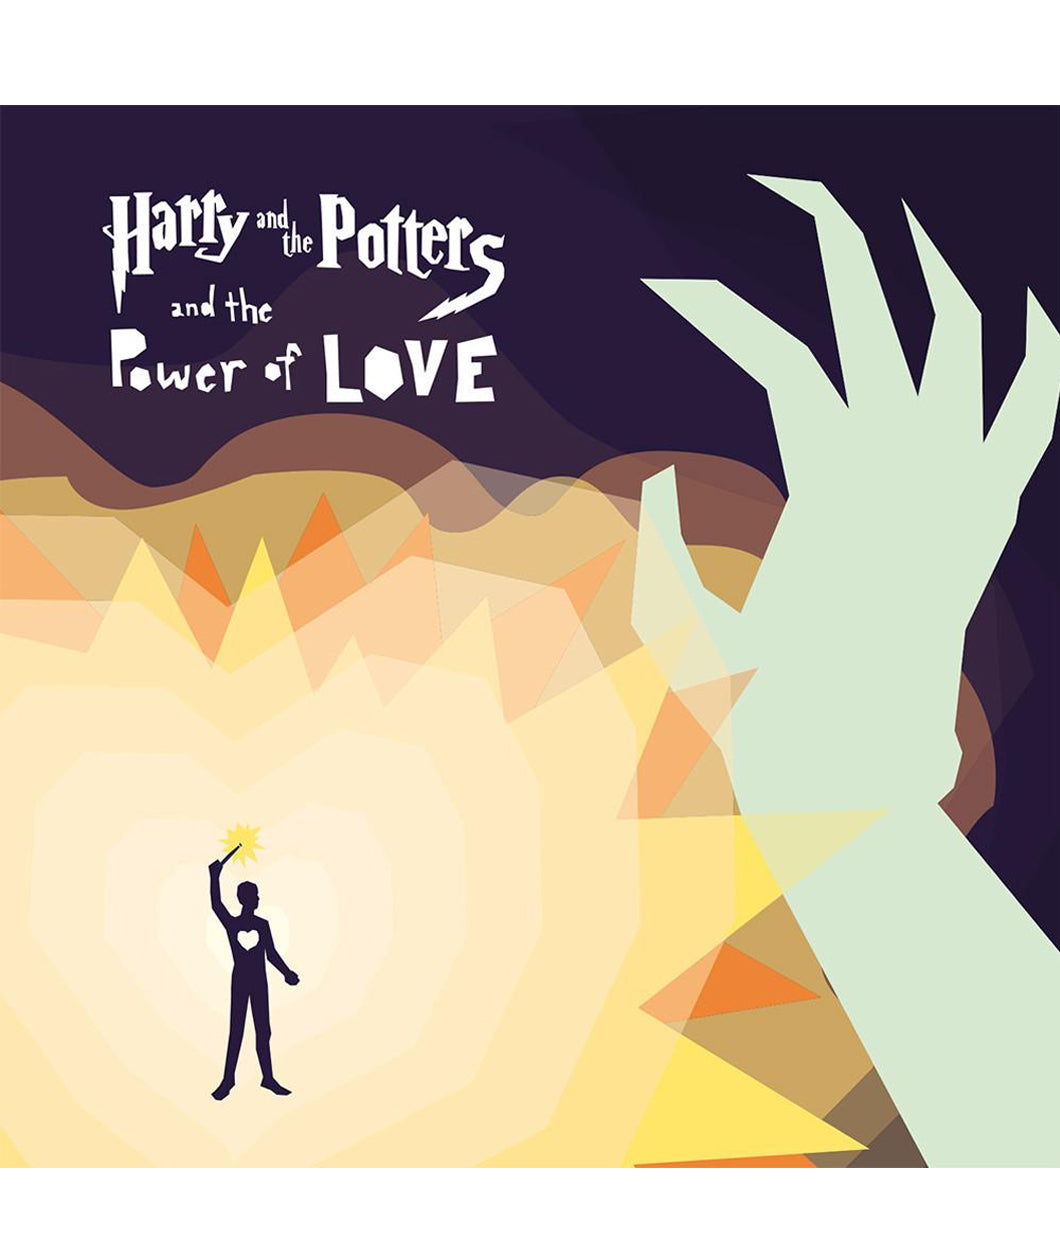 Album cover art showing a person holding up a wand with a heart on their chest. They are in the middle of yellow light with a hand on the side and text that reads 